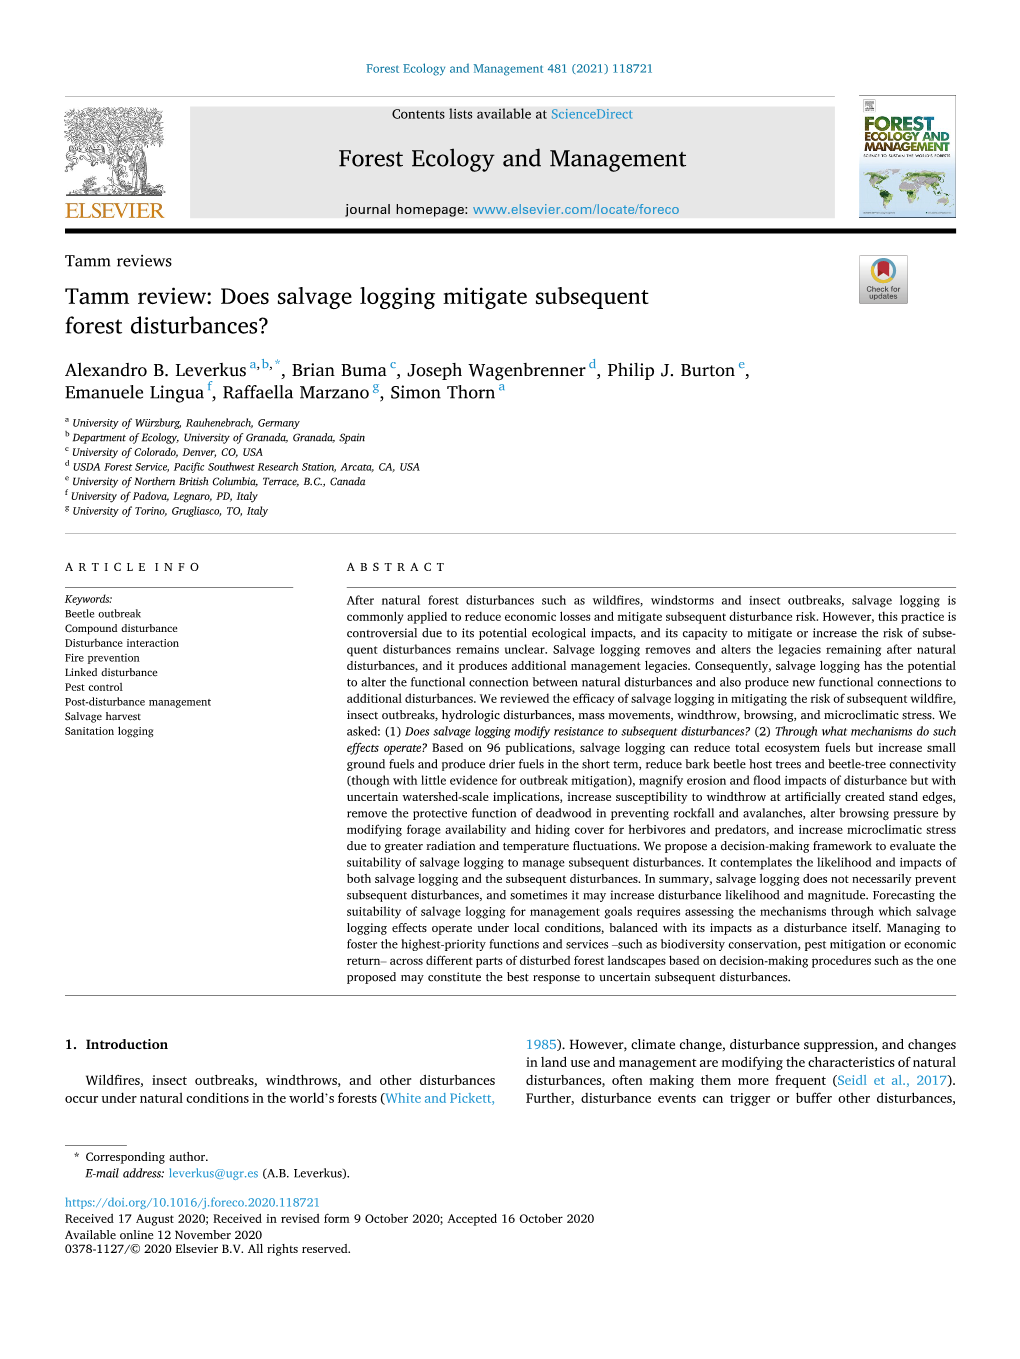 Tamm Review: Does Salvage Logging Mitigate Subsequent Forest Disturbances?